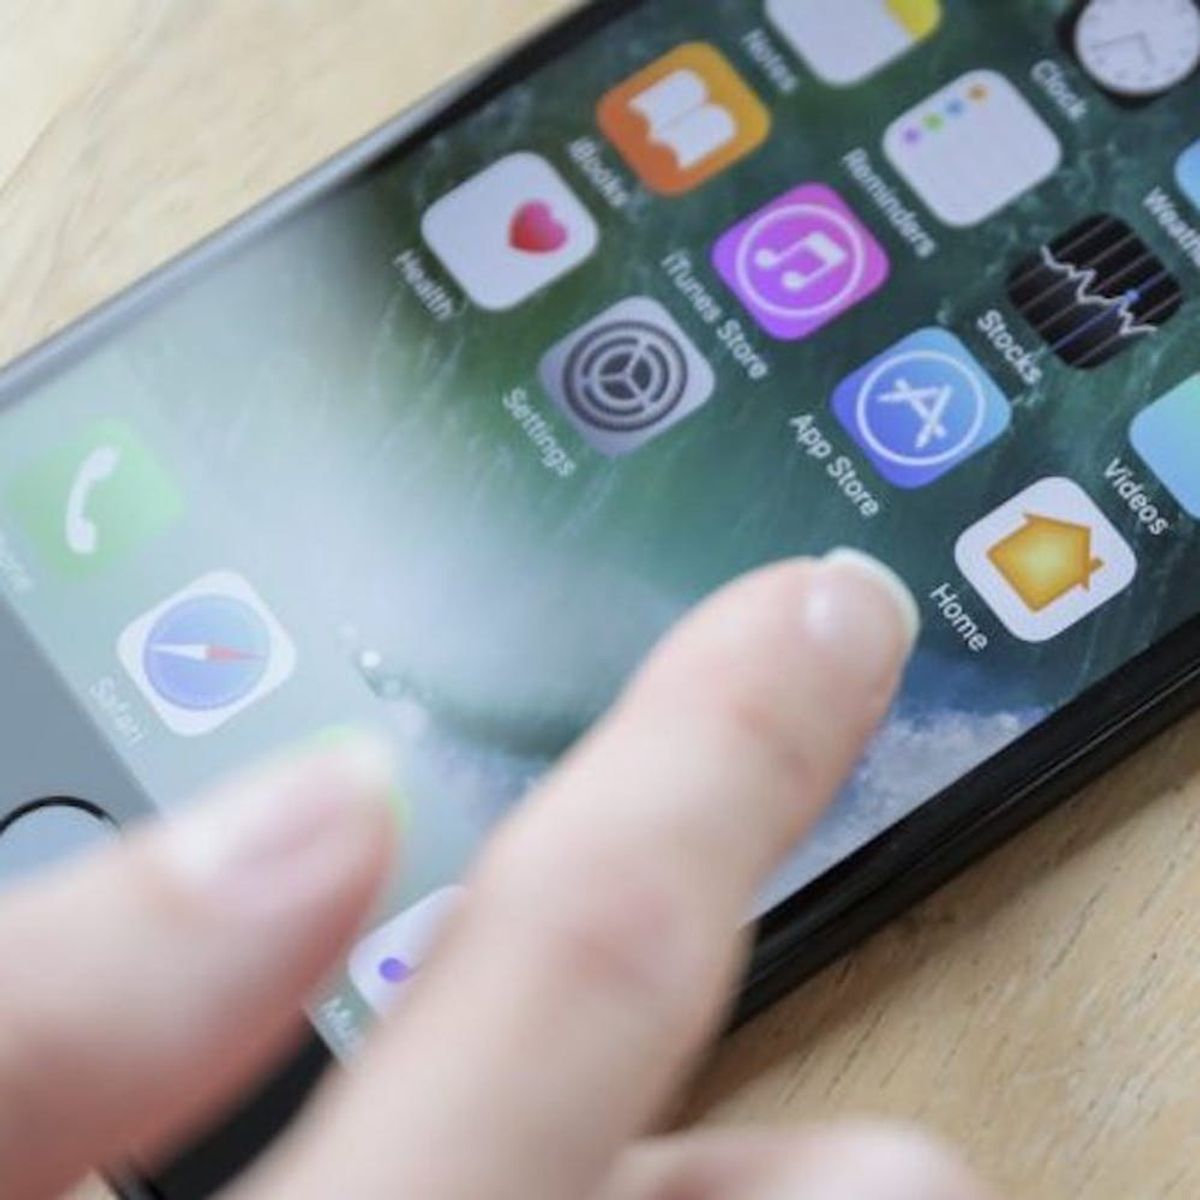 iPhone Users Beware: This Video Will Crash Your Phone